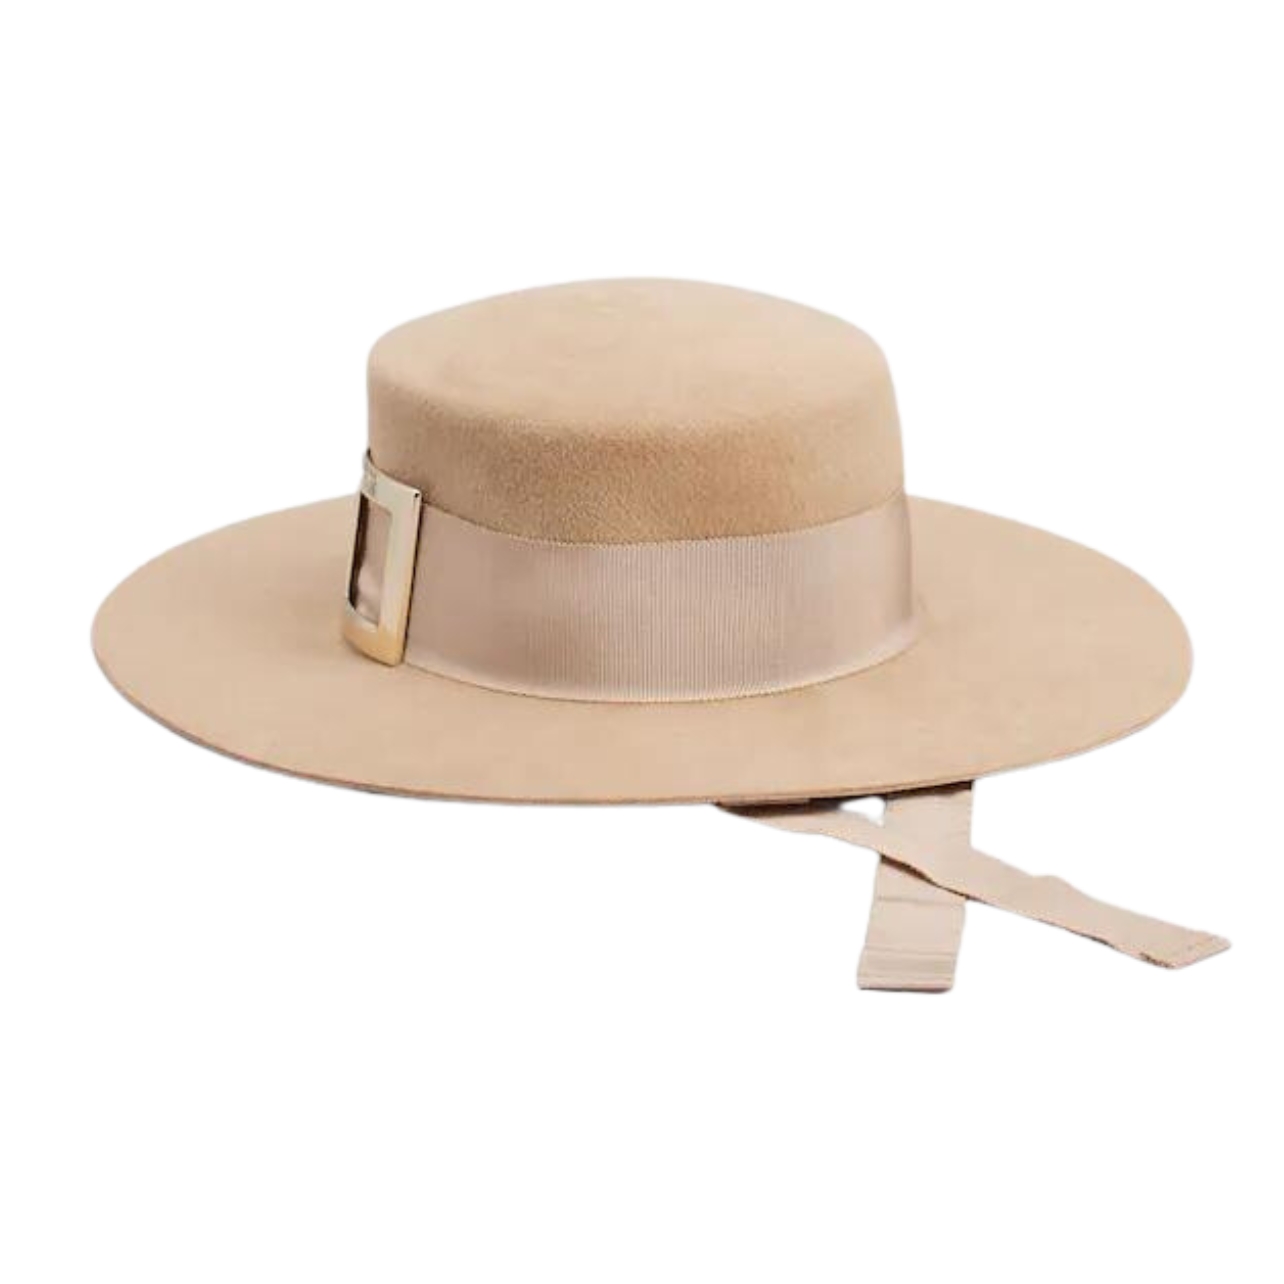 There’s no such thing as “plane head” when you have Roger Vivier’s metal buckle hat. The wide brim adds extra protection from the sun when you’re stepping off the plane and into paradise, while instantly helping you look pulled together after a long flight.